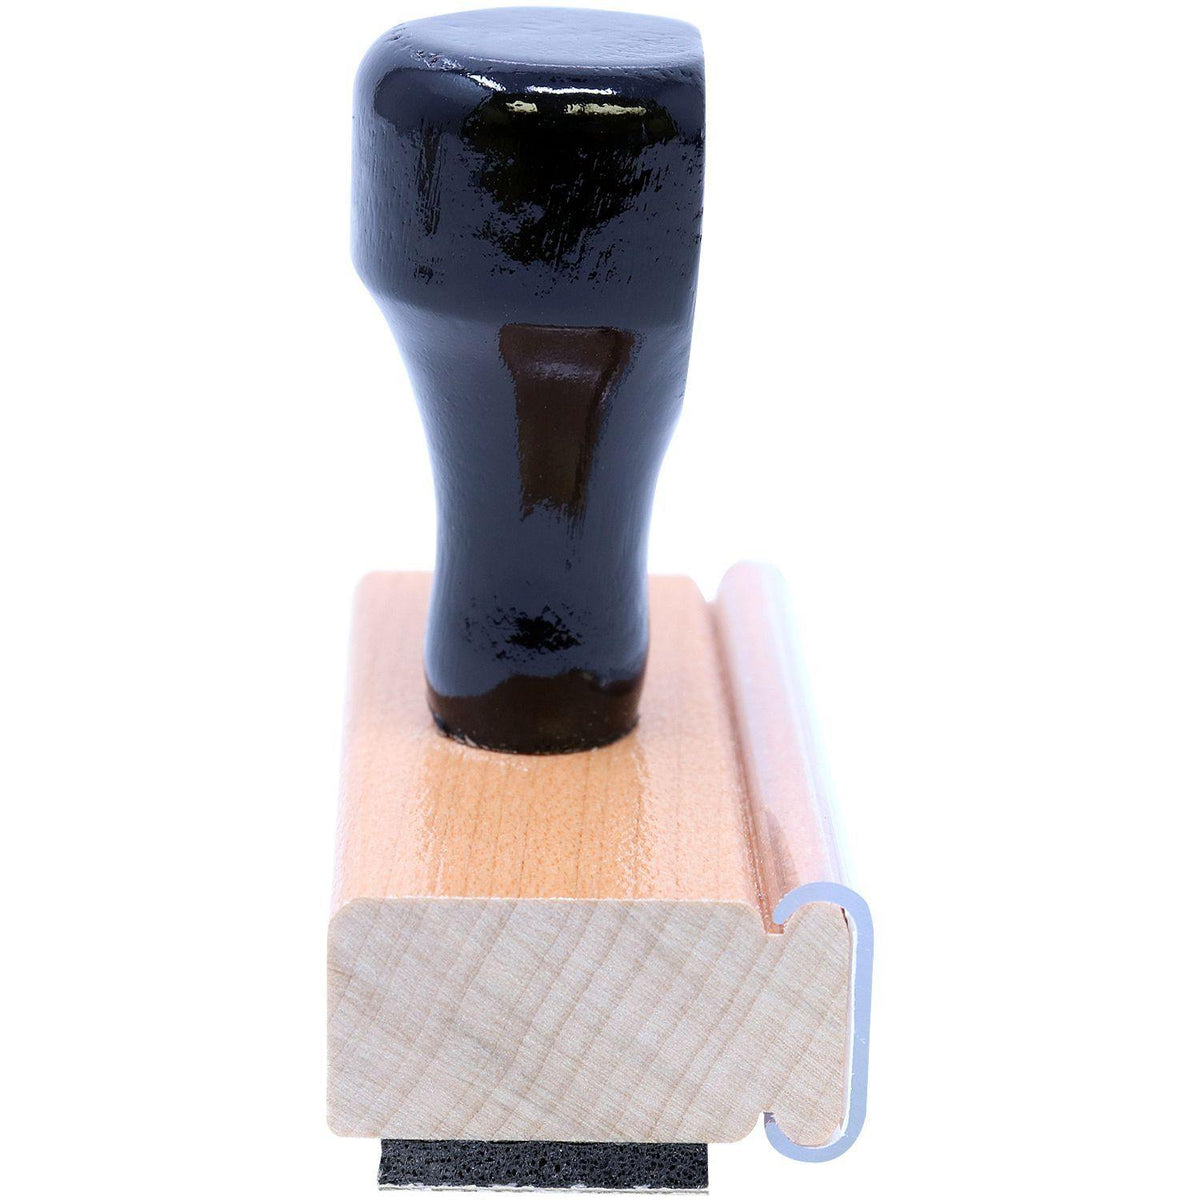 Large Standard Mail Stacked Rubber Stamp - Engineer Seal Stamps - Brand_Acorn, Impression Size_Large, Stamp Type_Regular Stamp, Type of Use_Postal &amp; Mailing